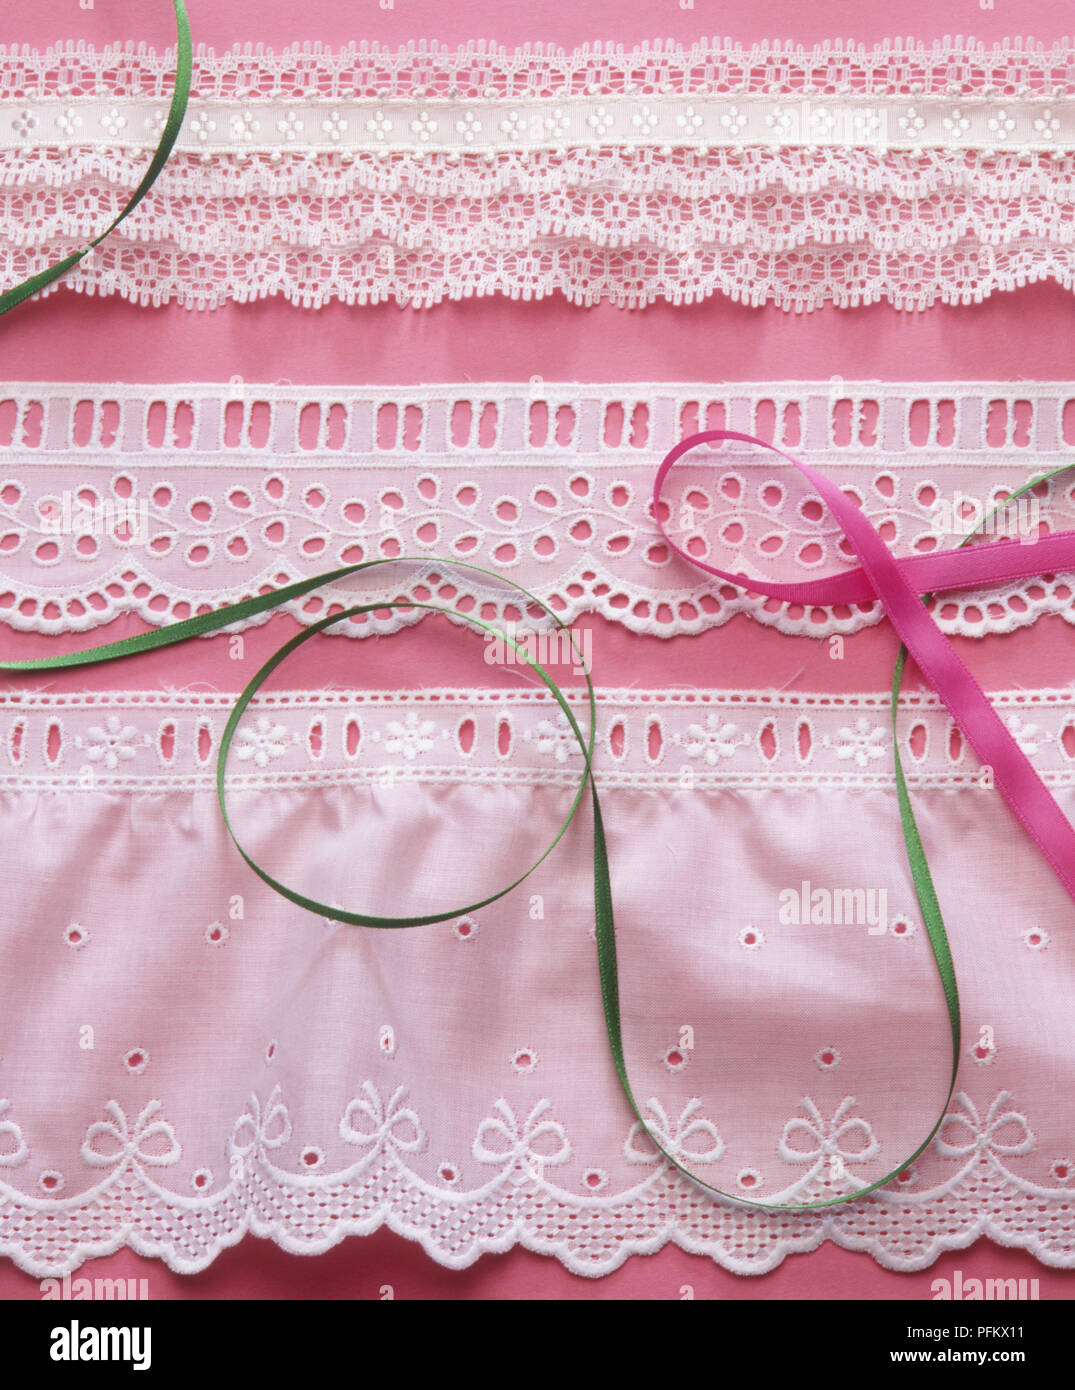 Embroidered lace trimmings and ribbons Stock Photo